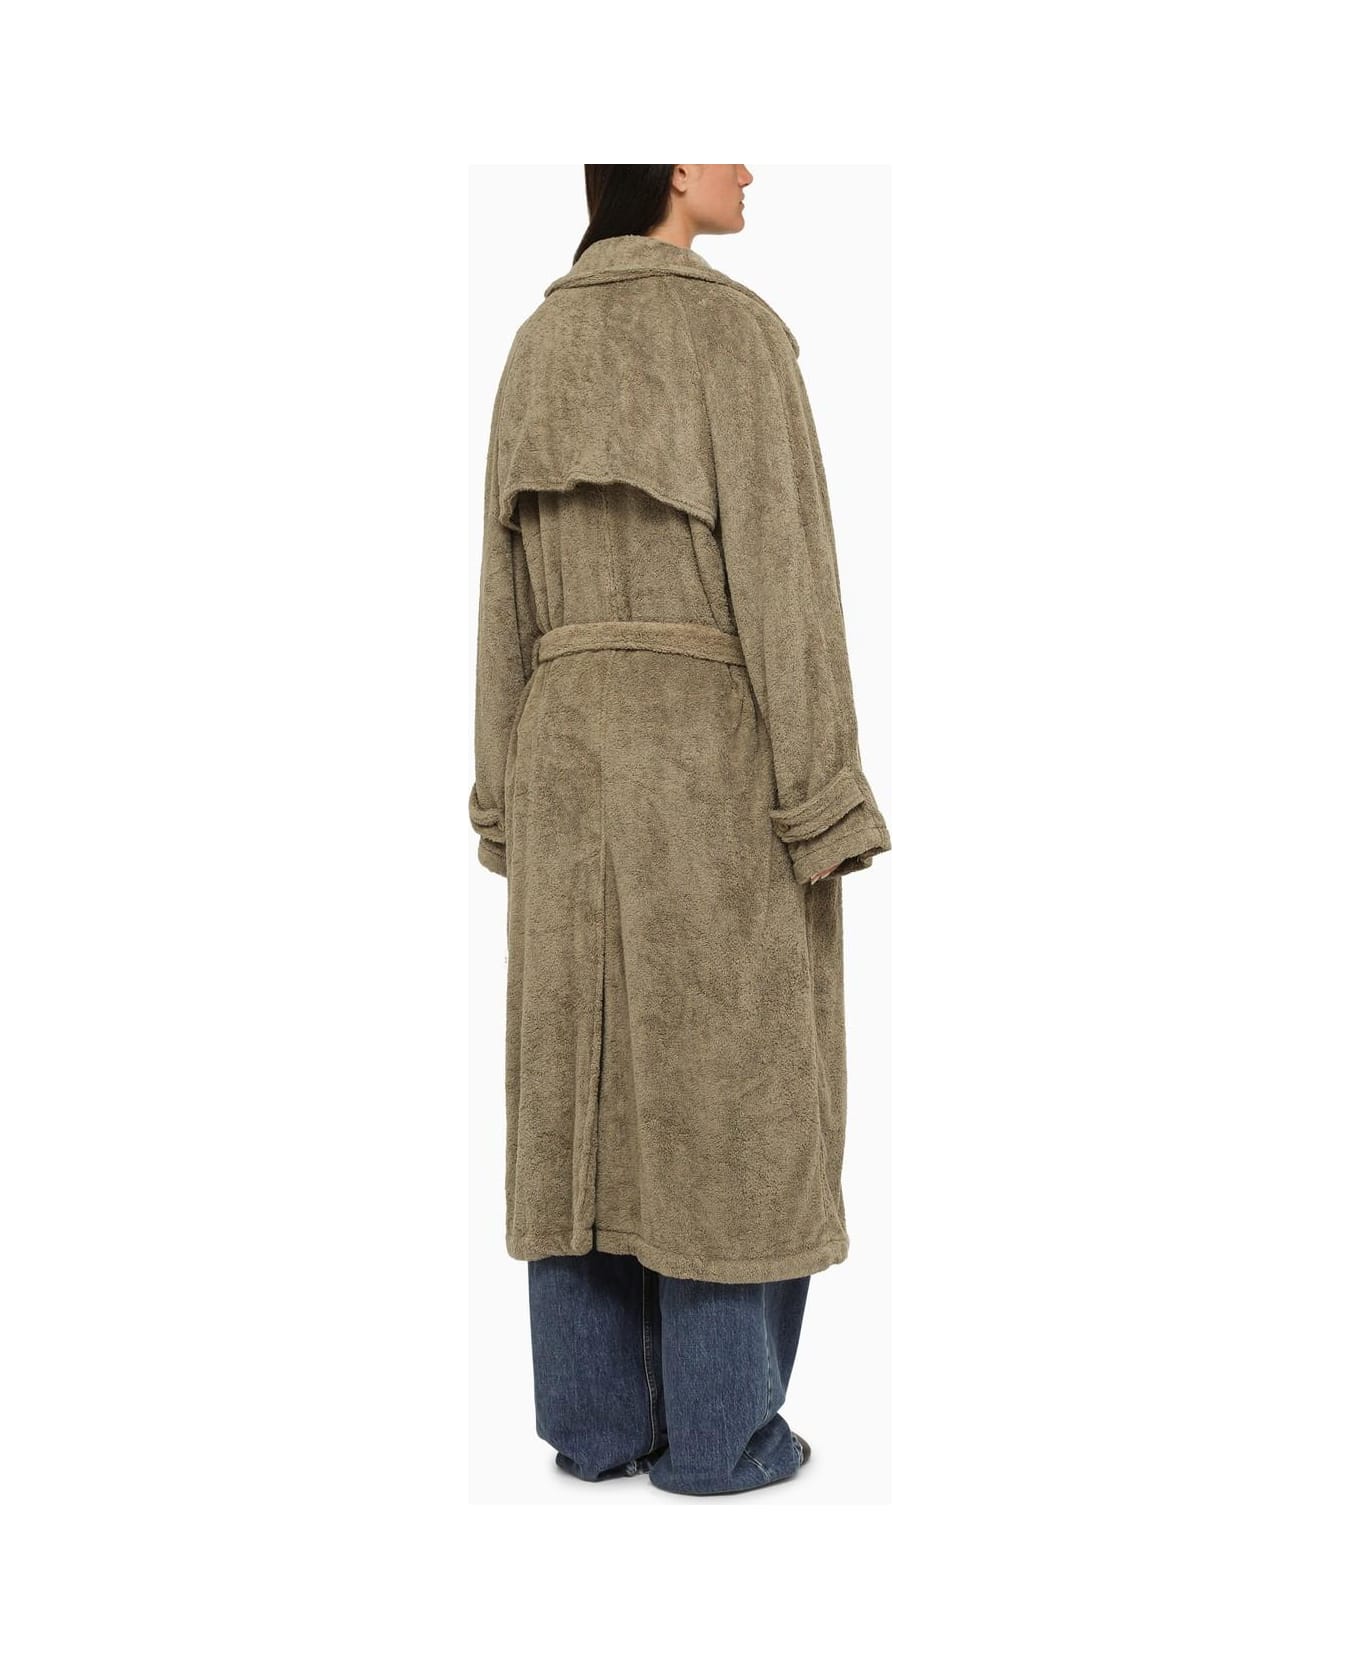 Balenciaga Towel Trench Coat In Sand-coloured Cotton - BEIGE コート